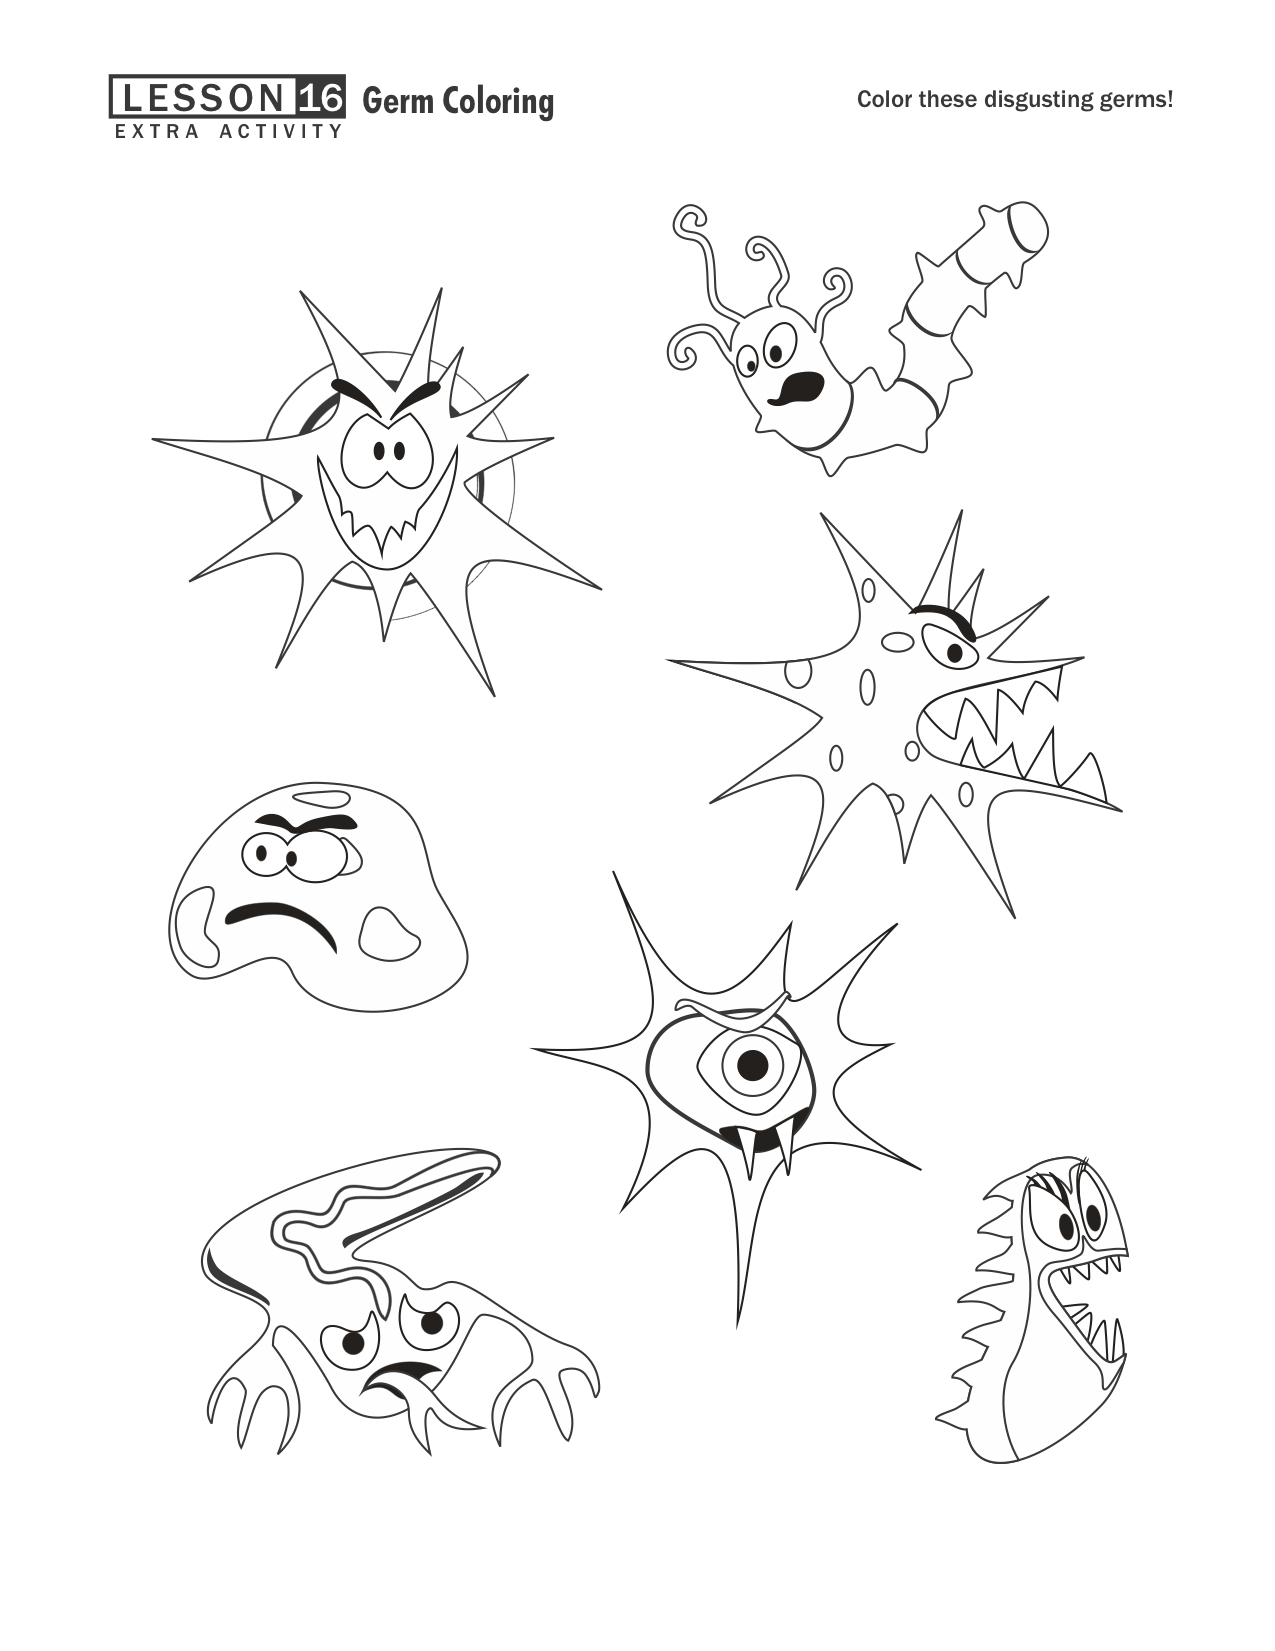 Printable Hand Washing Coloring Pages at GetColorings.com | Free